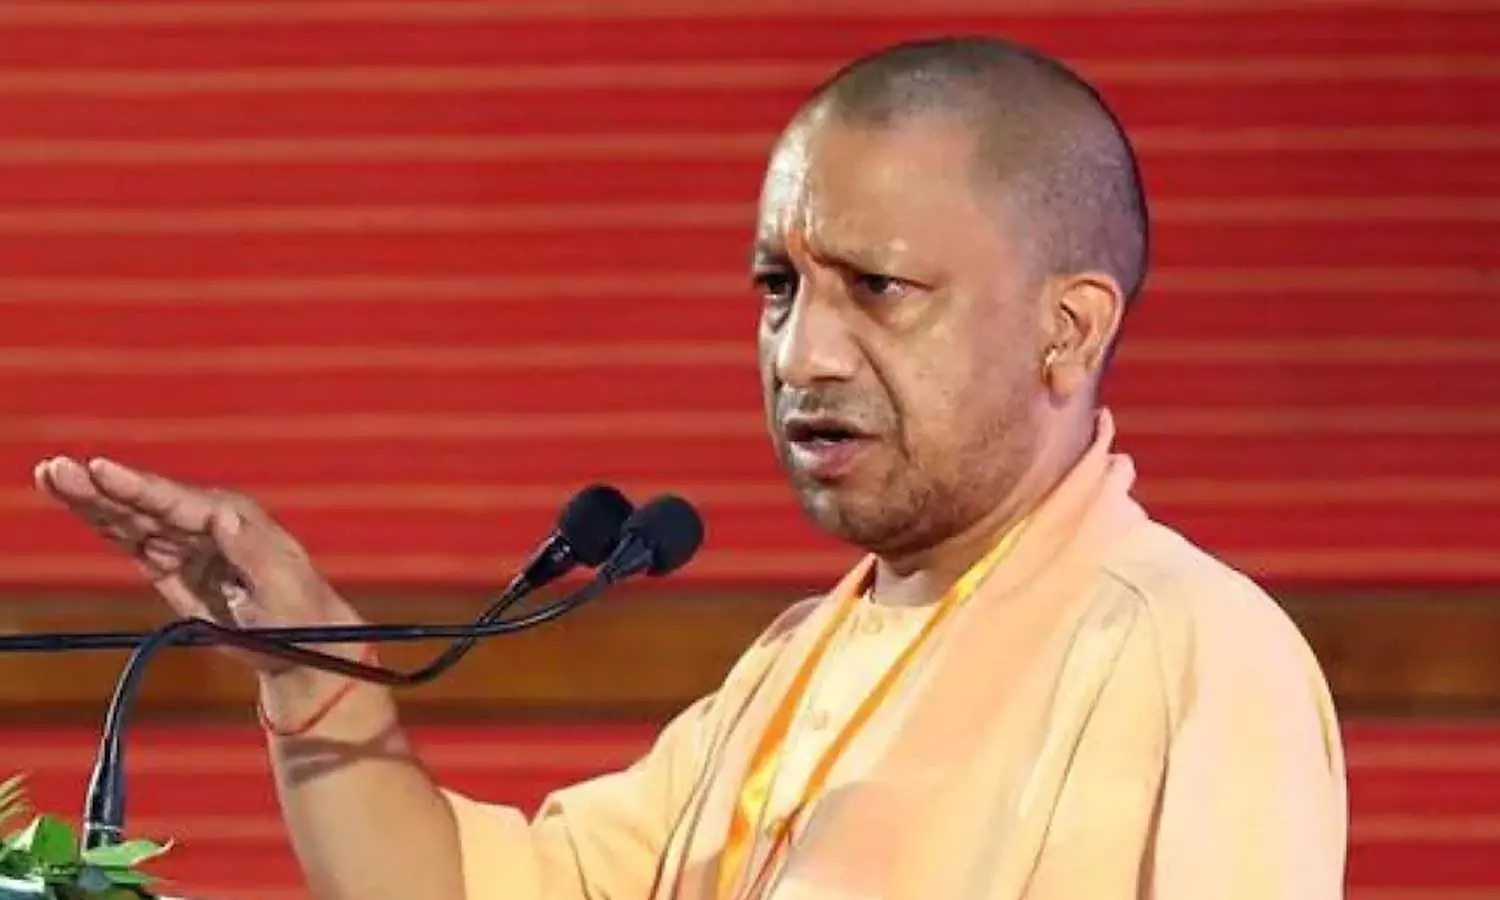 Chief Minister Yogi Adityanath said that there will be branding of grains of natural farming in the mandis